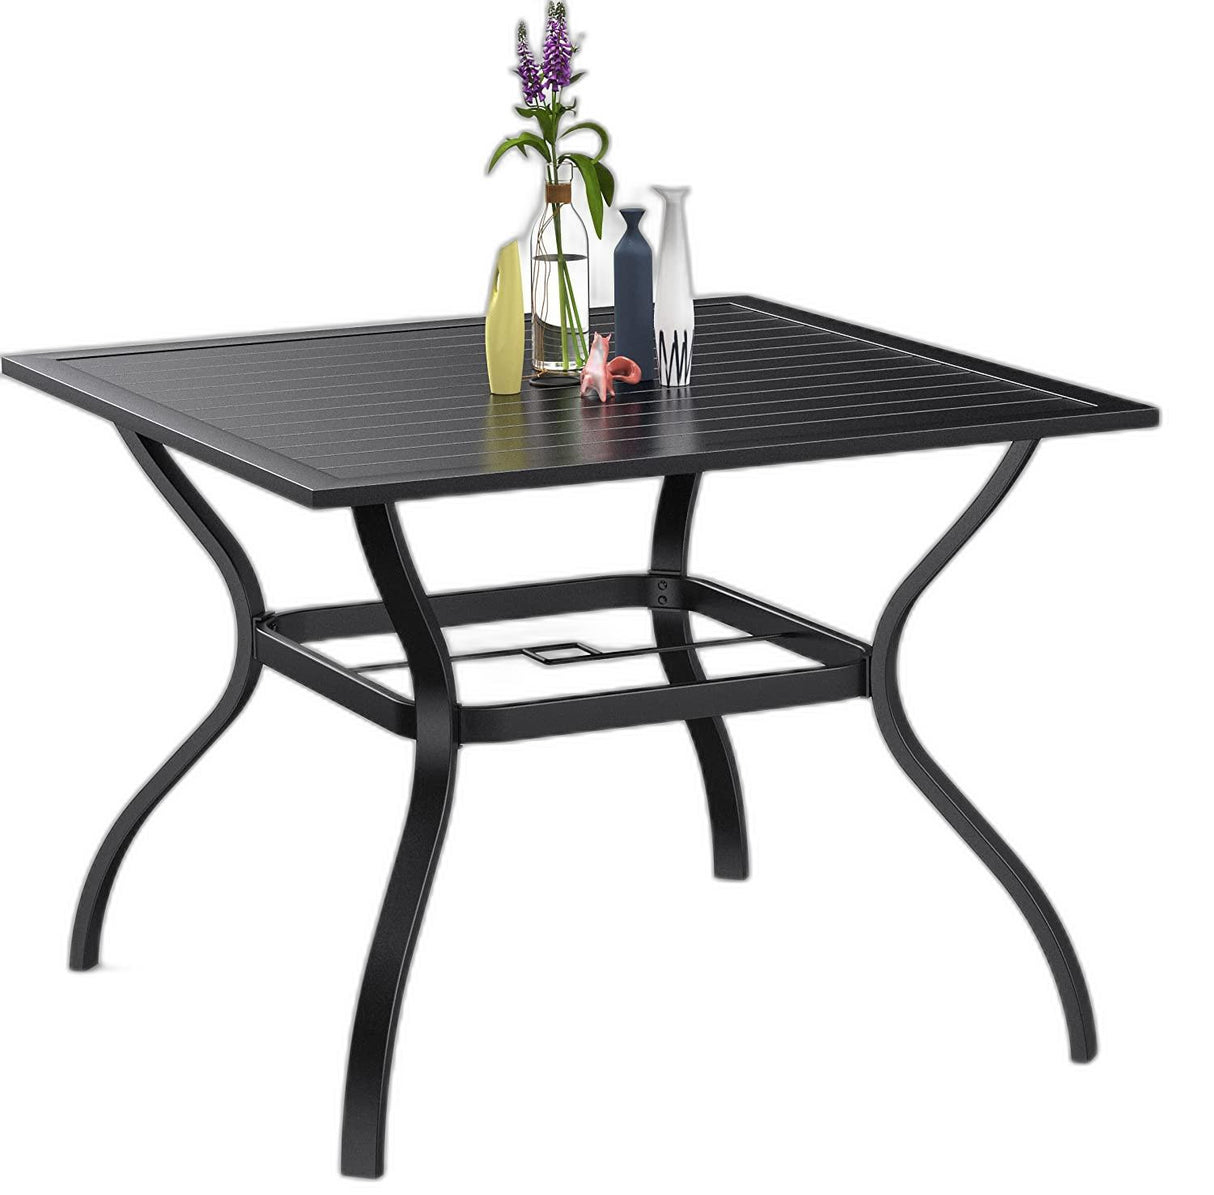 37" Black Square Metal Outdoor Dining Table with Umbrella Hole